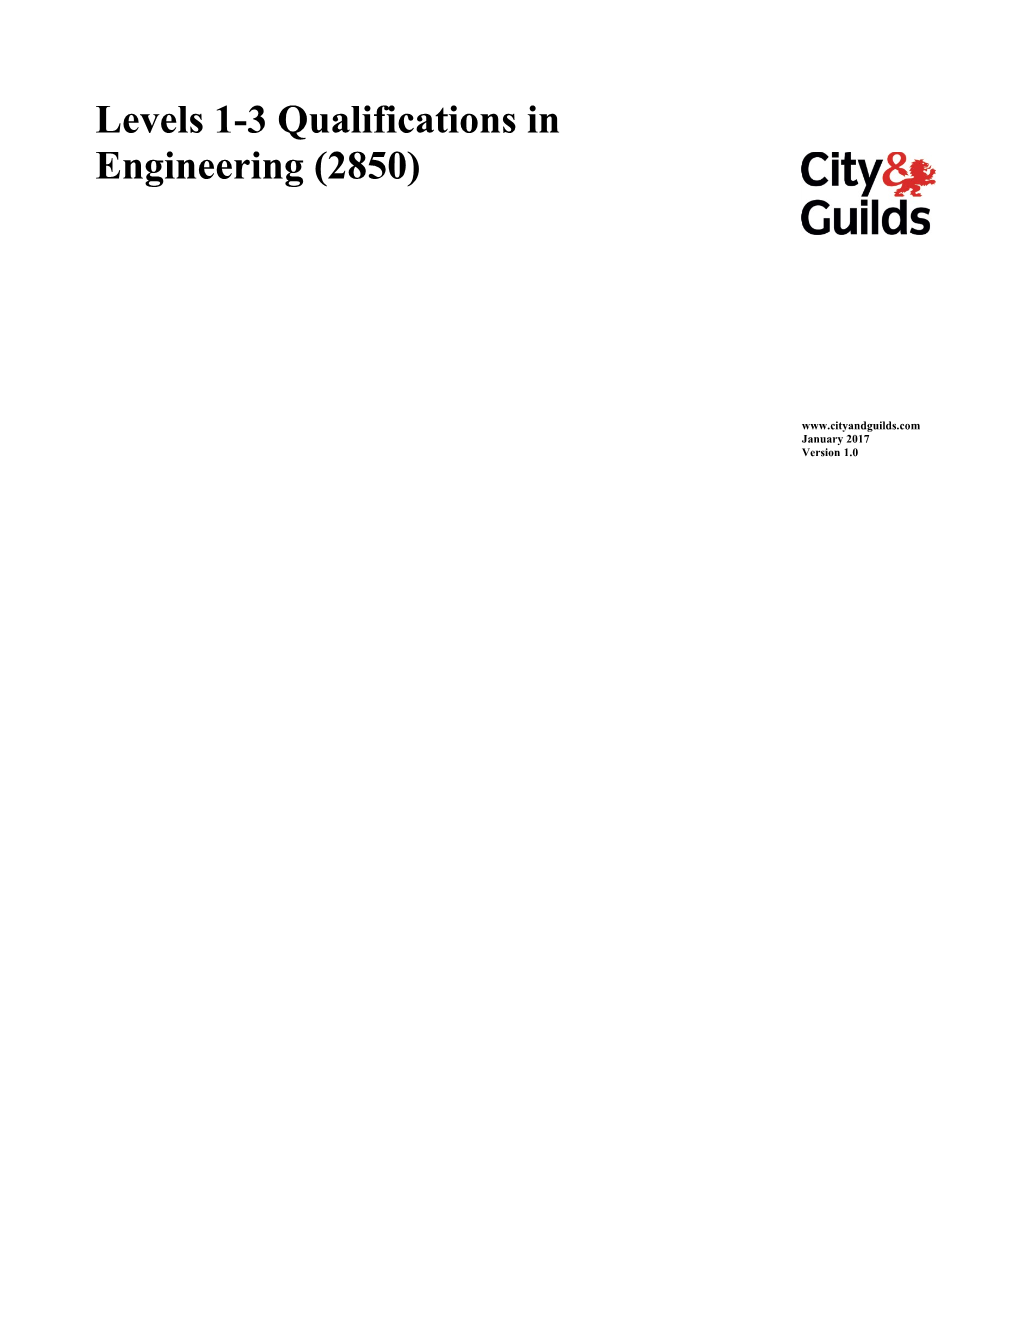 Levels 1-3 Qualifications in Engineering (2850)